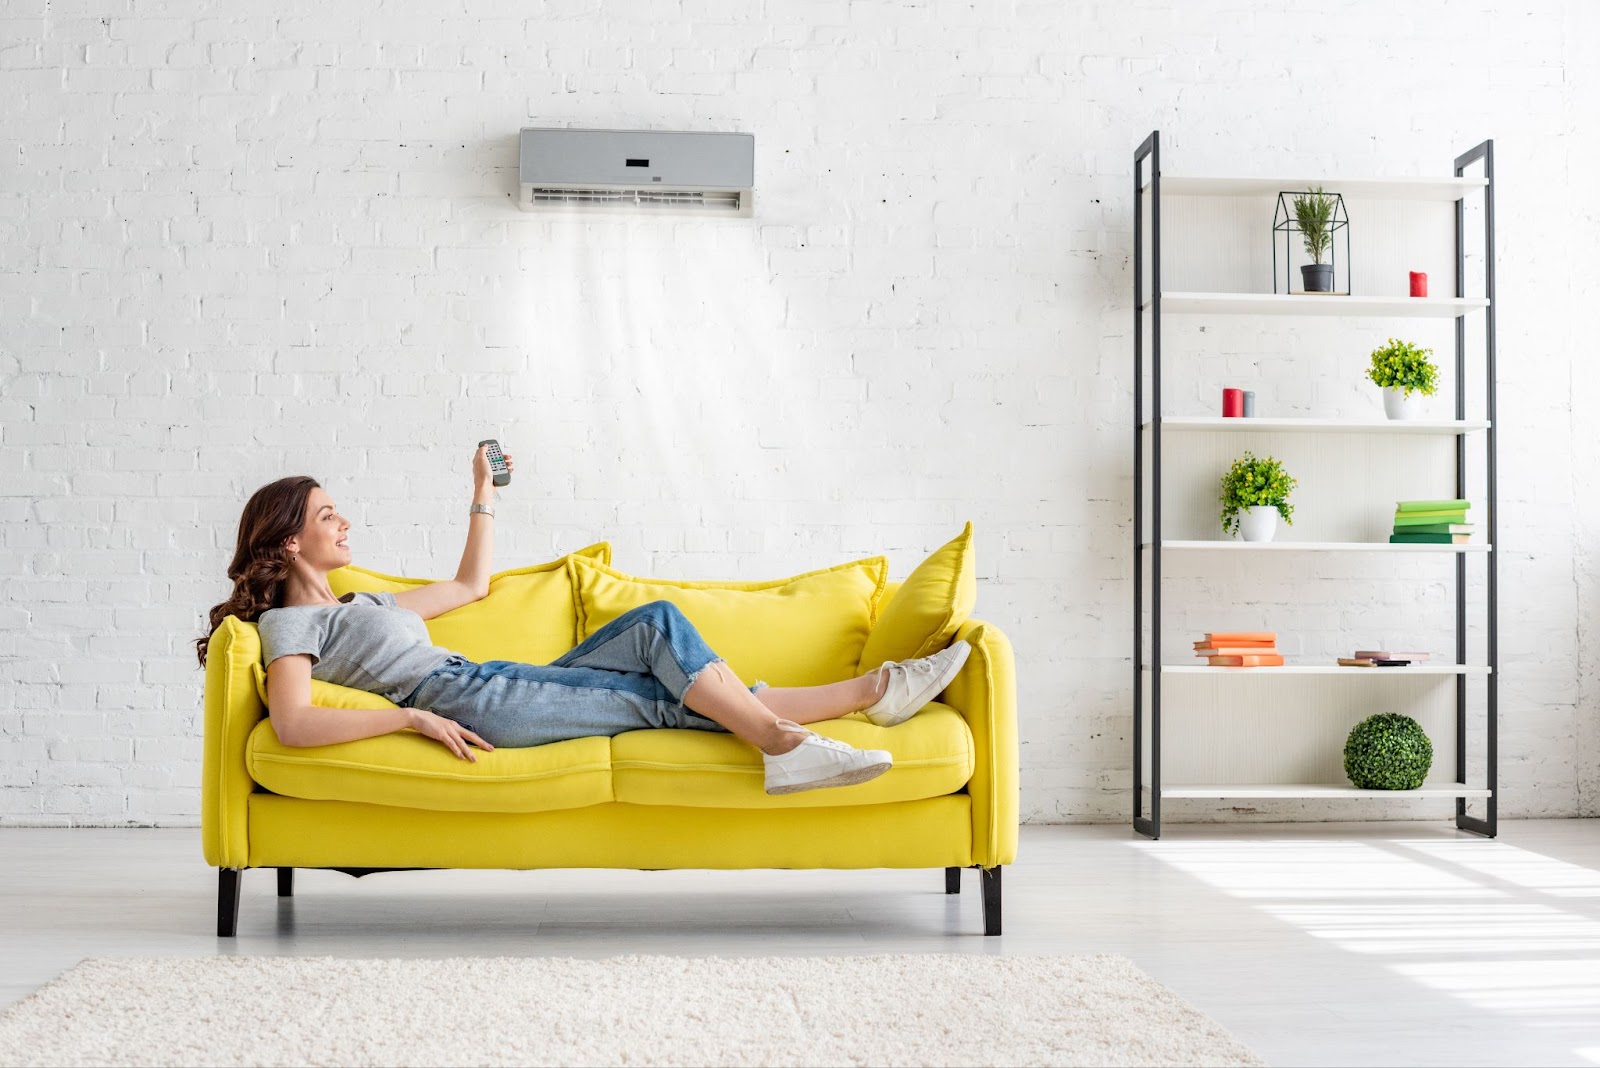 A woman laying on a yellow couch holding a remote control up towards an air conditioning unit on the wall near the ceiling.